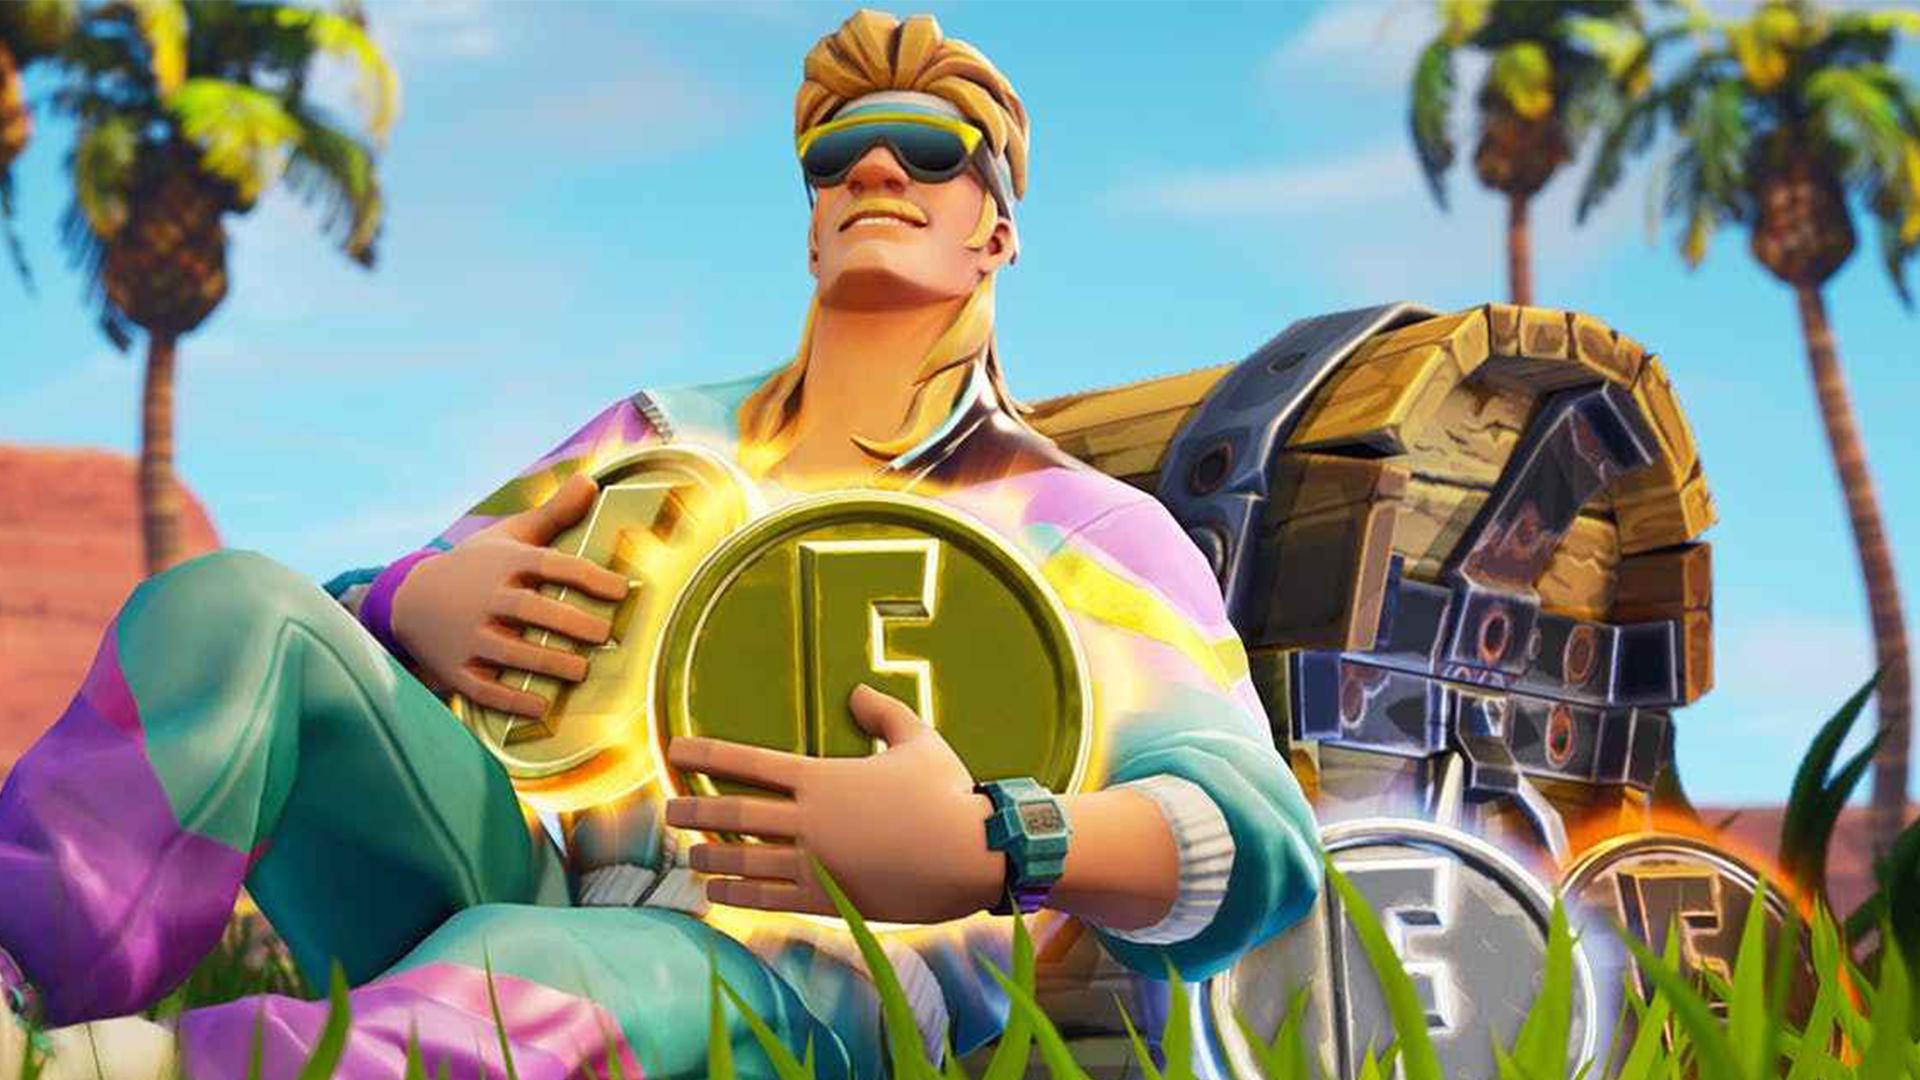 Fortnite's Season 8 Battle Pass will be available for free